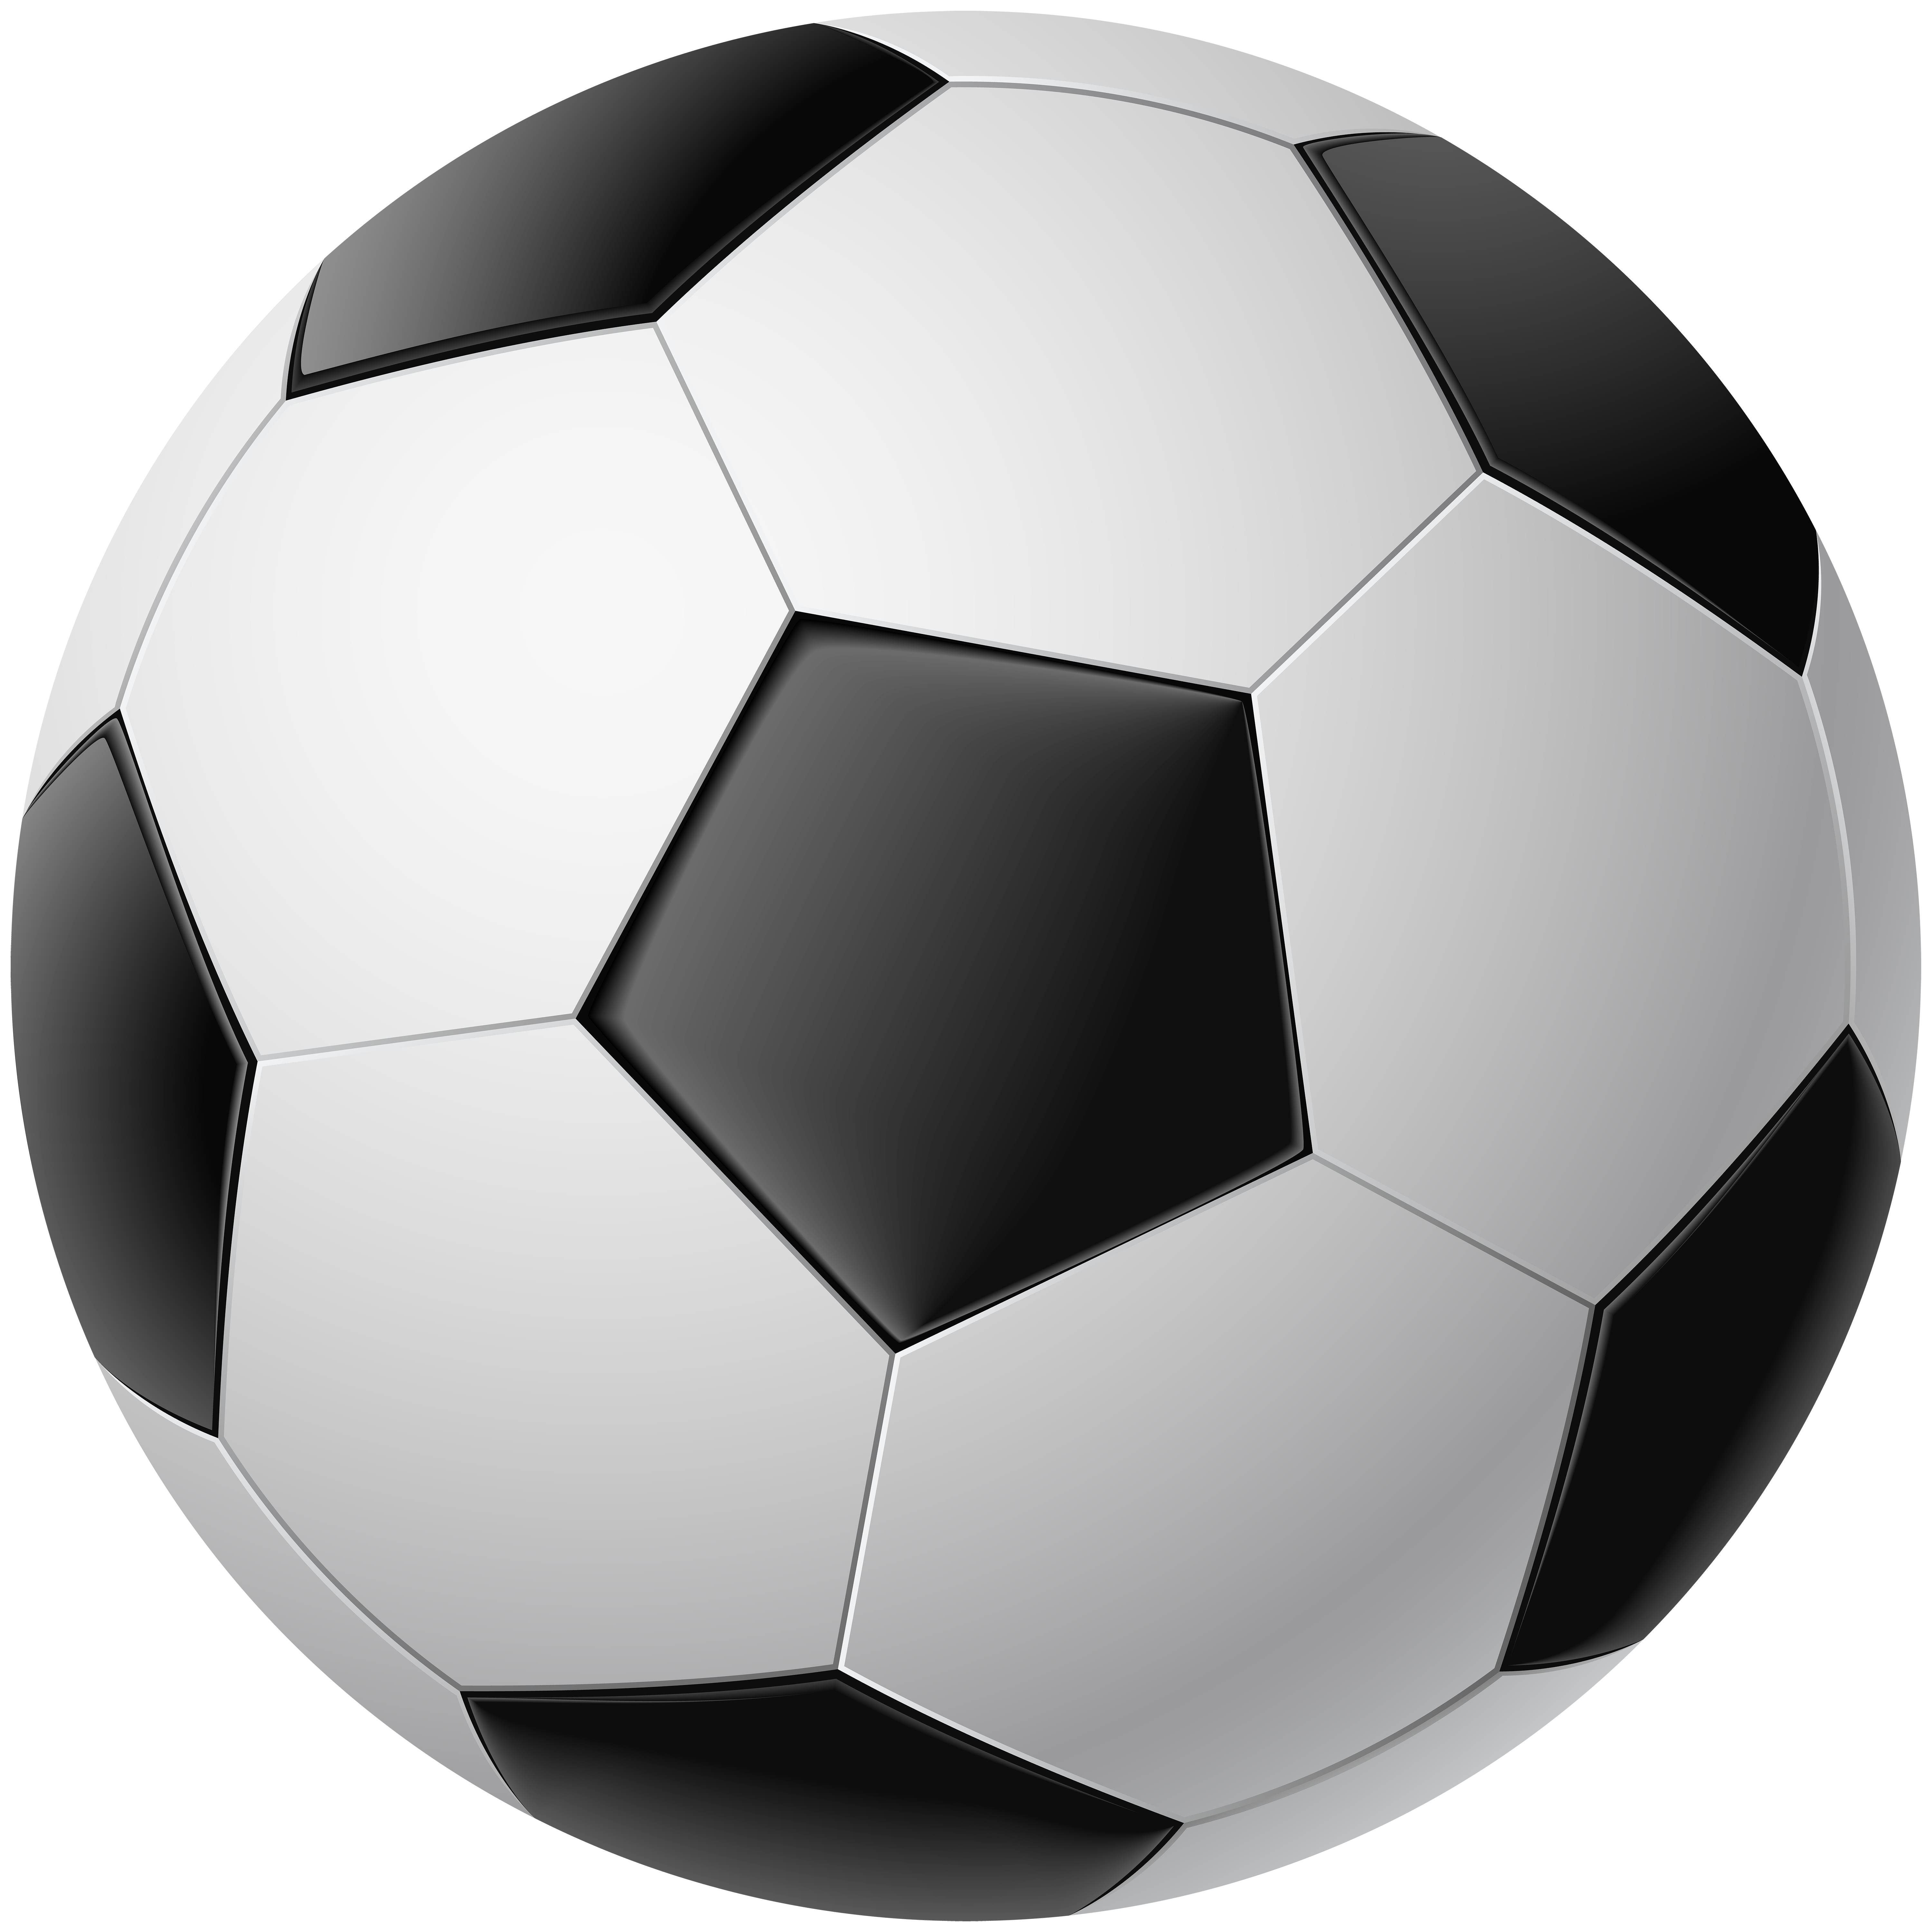 Soccer Ball Clip Art Free Large Images - vrogue.co